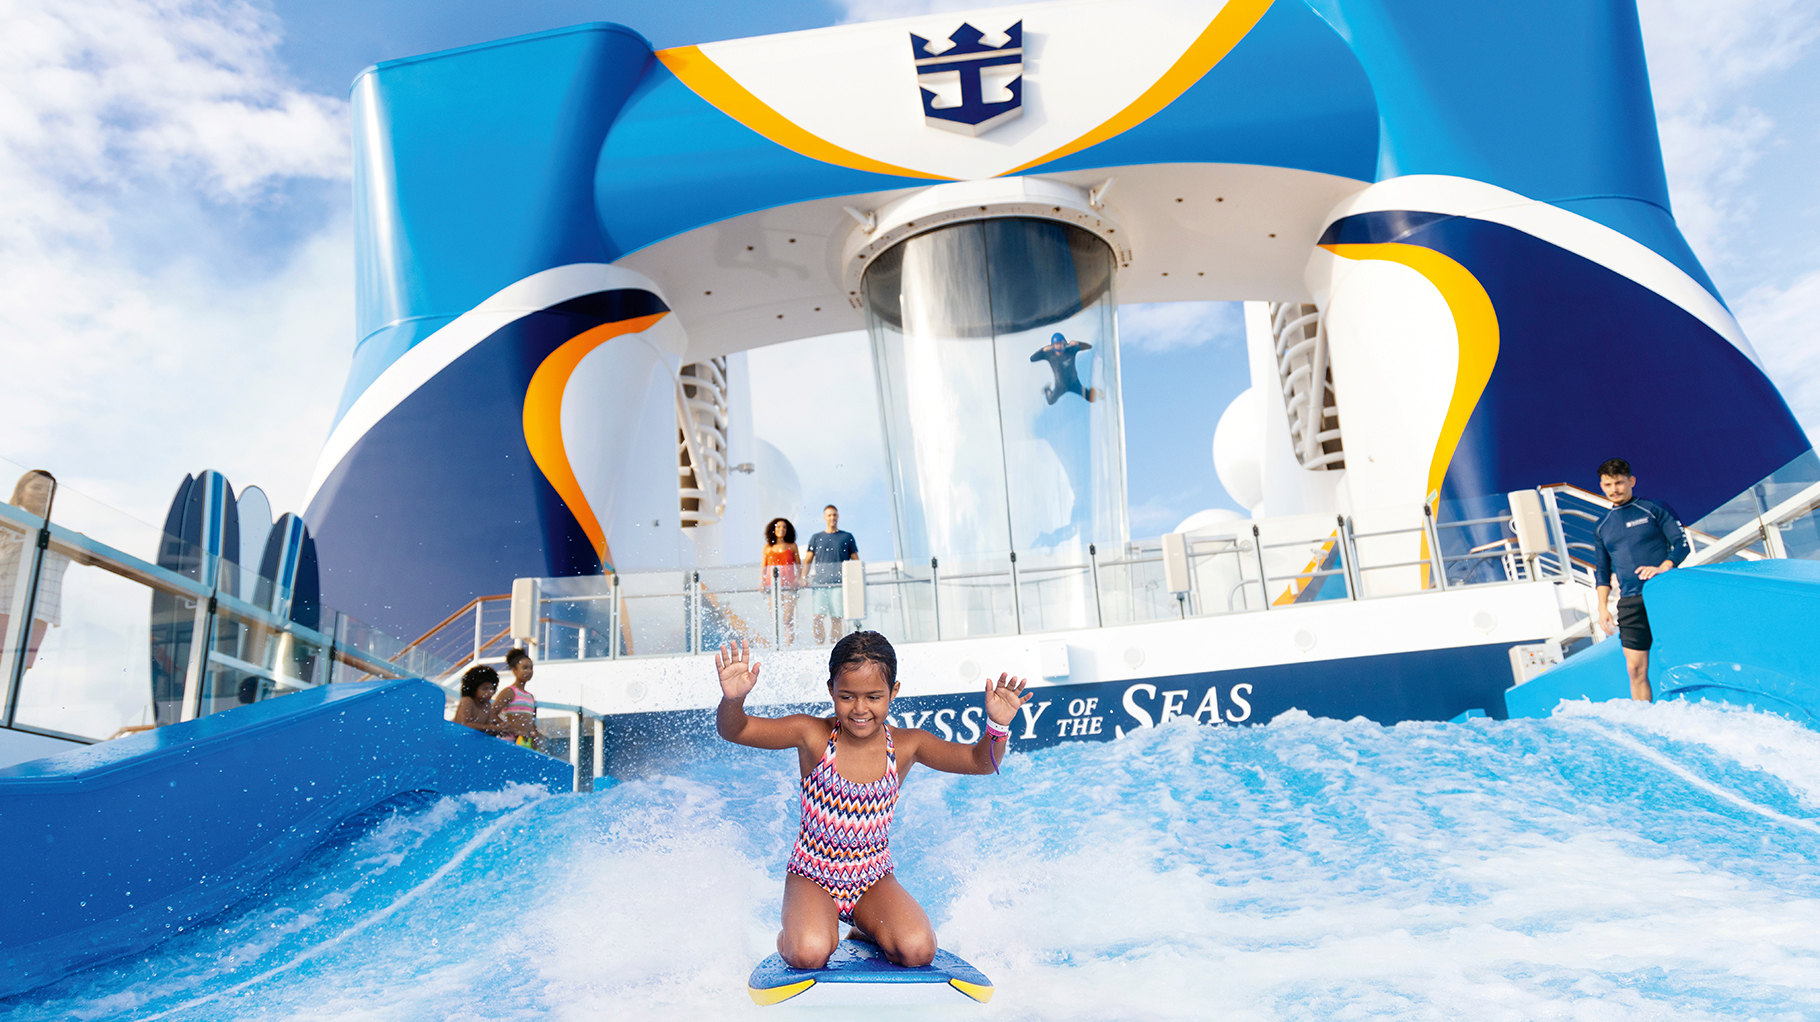 The kids will have a blast on large ocean ships